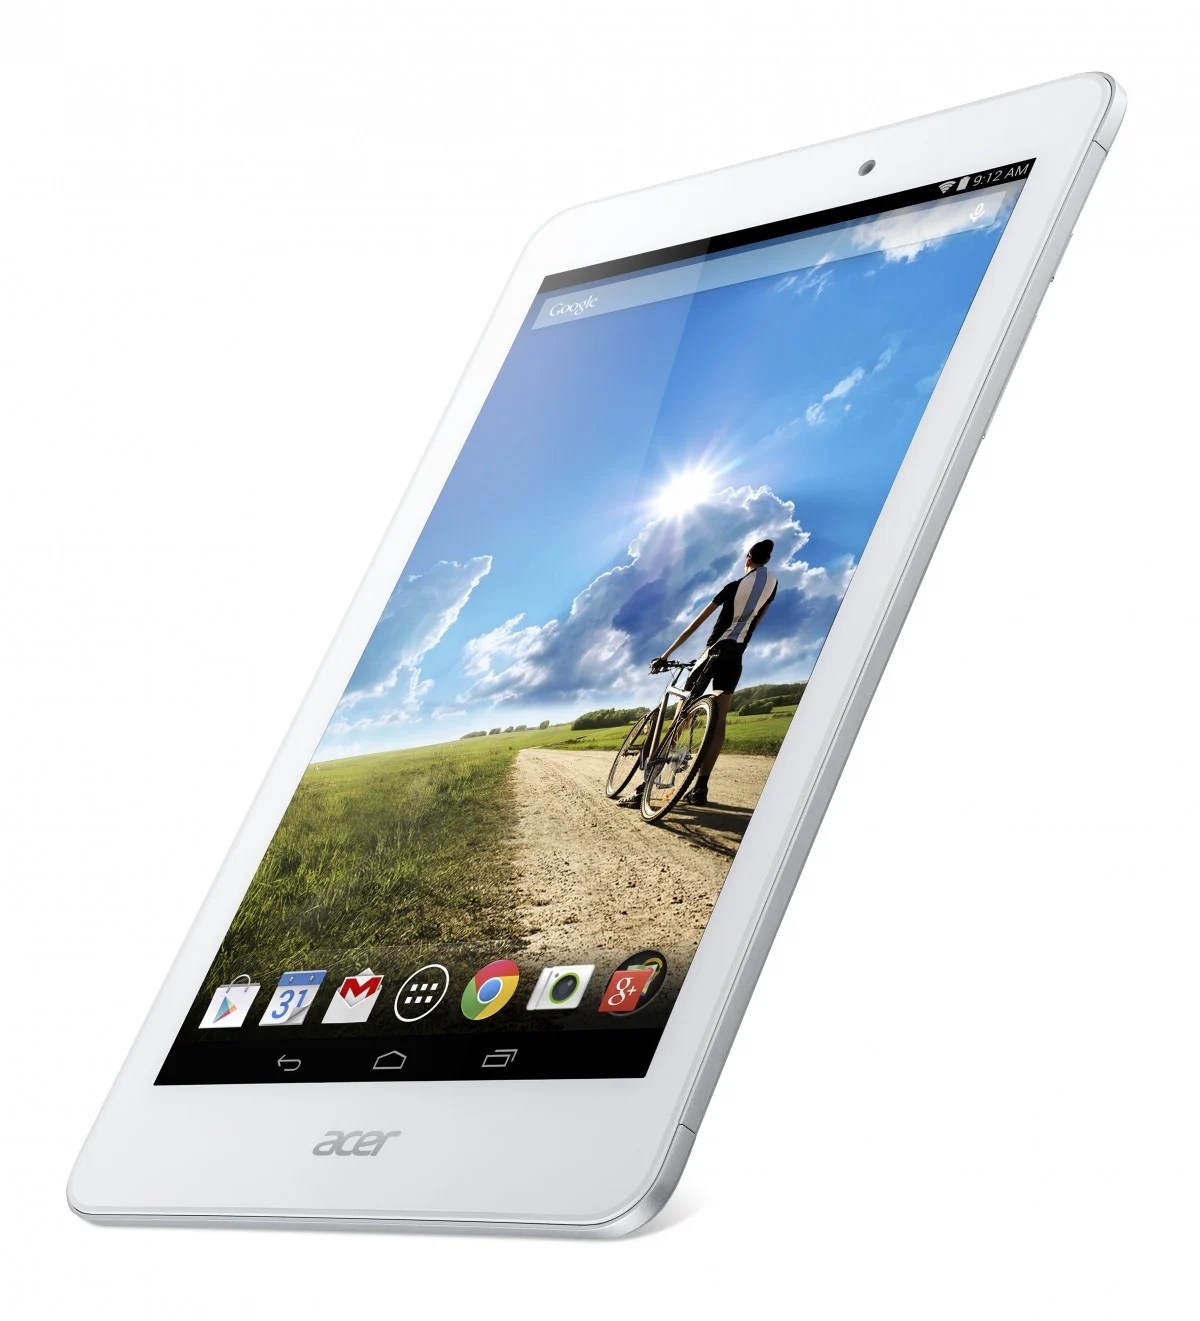 Acer : les tablettes Iconia Tab 8W, Iconia Tab 10, et Iconia One 8 sont officielles